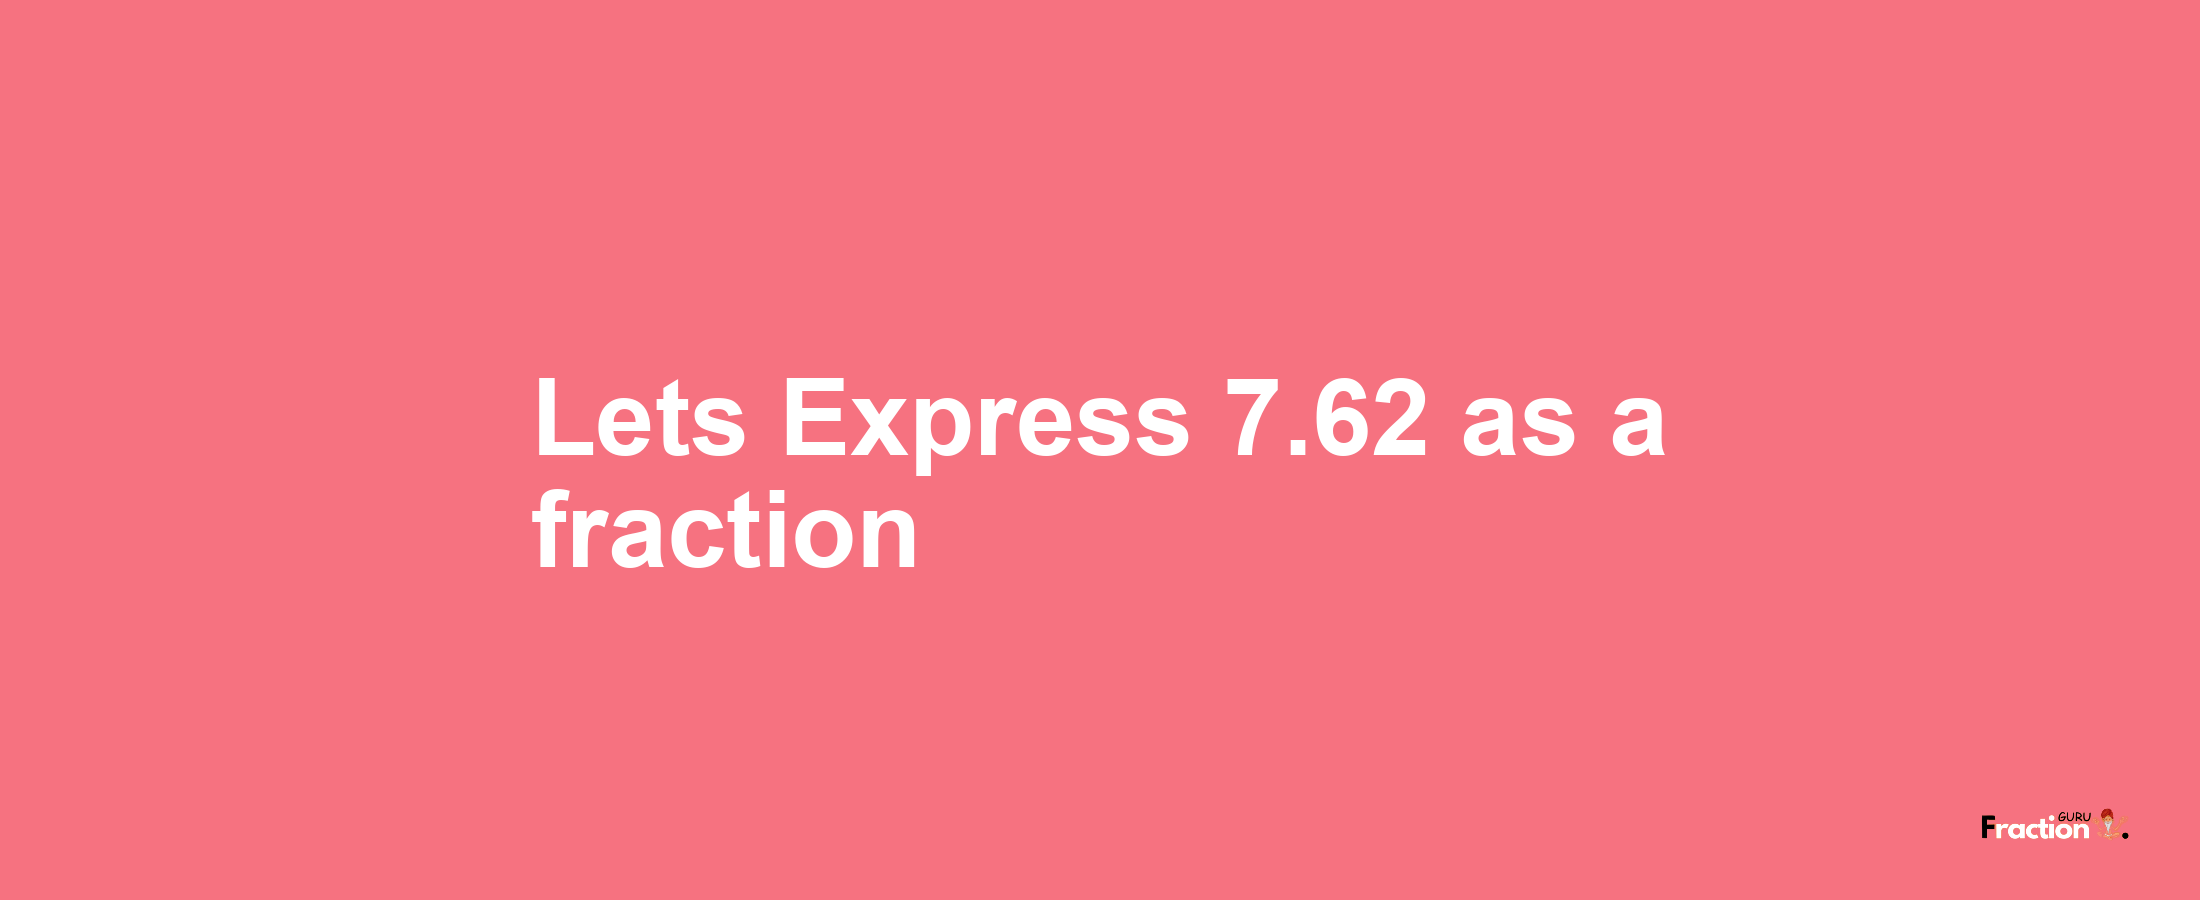 Lets Express 7.62 as afraction